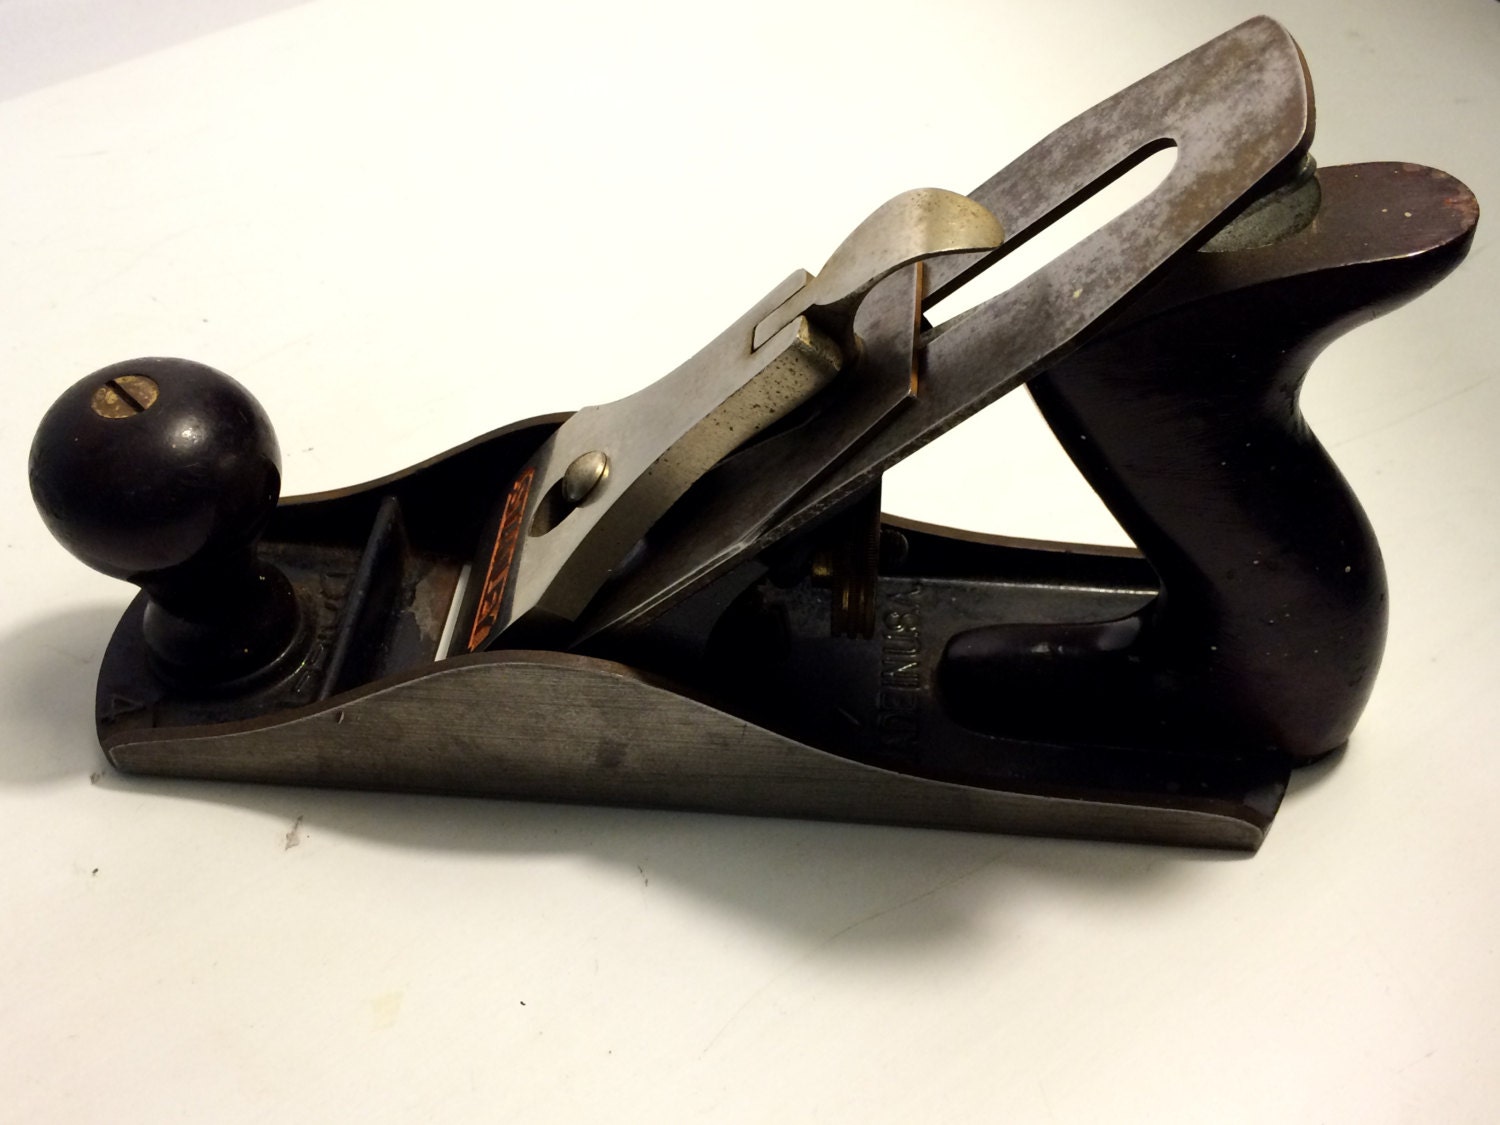 Vintage Stanley Bailey No 4 Smooth Wood Plane by ANNZTIQUES